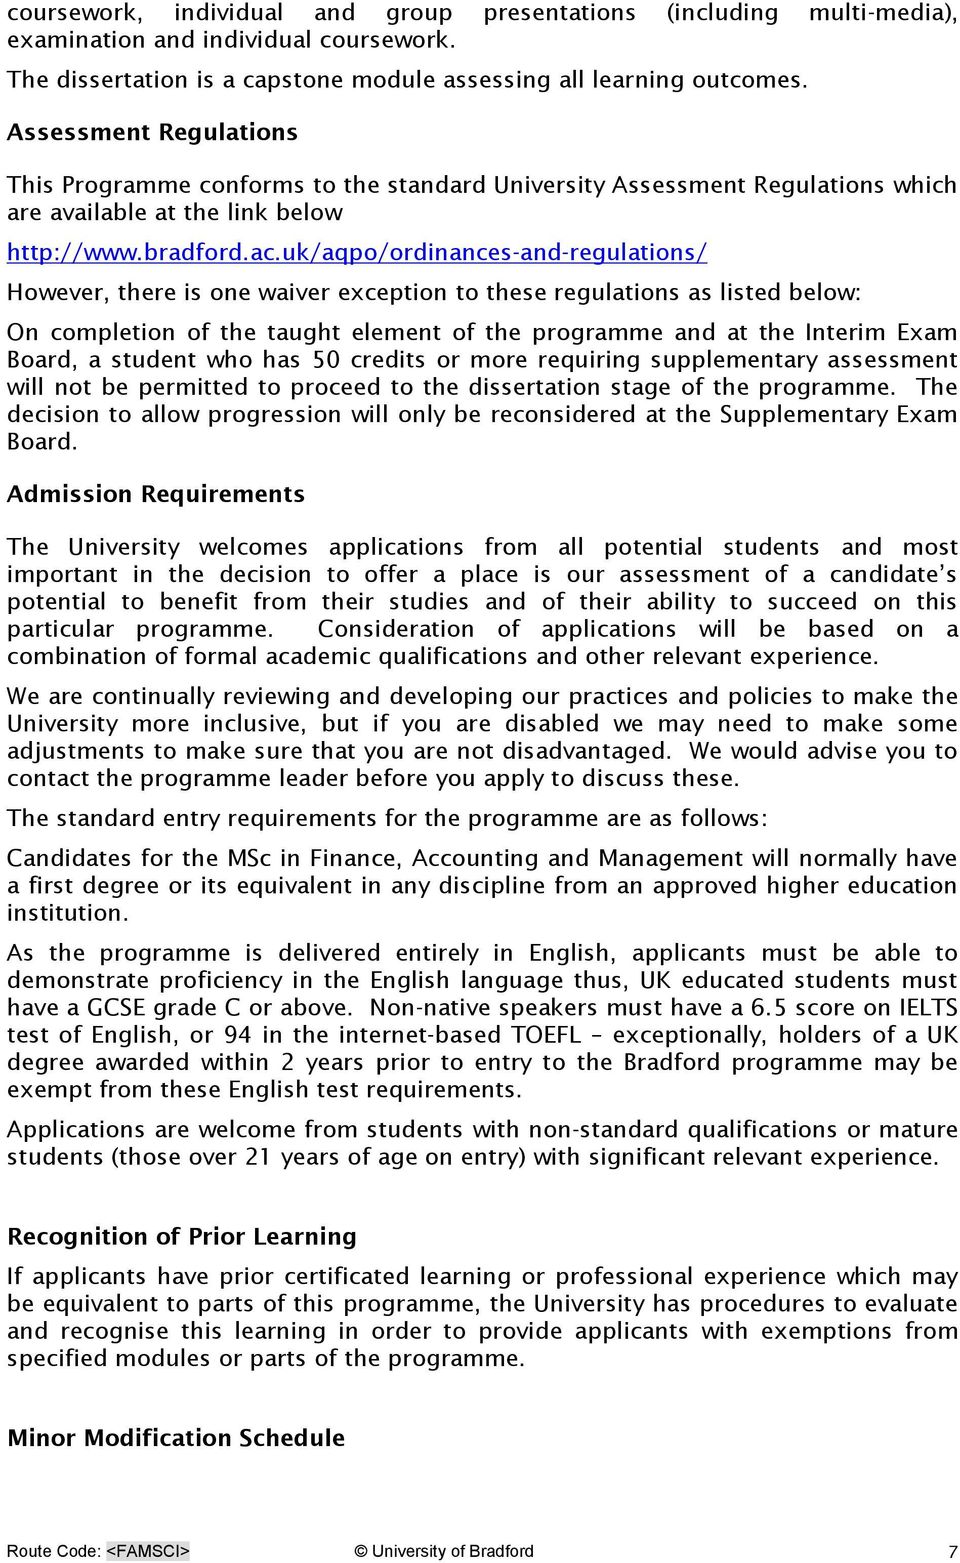 uk/aqpo/ordinances-and-regulations/ However, there is one waiver exception to these regulations as listed below: On completion of the taught element of the programme and at the Interim Exam Board, a